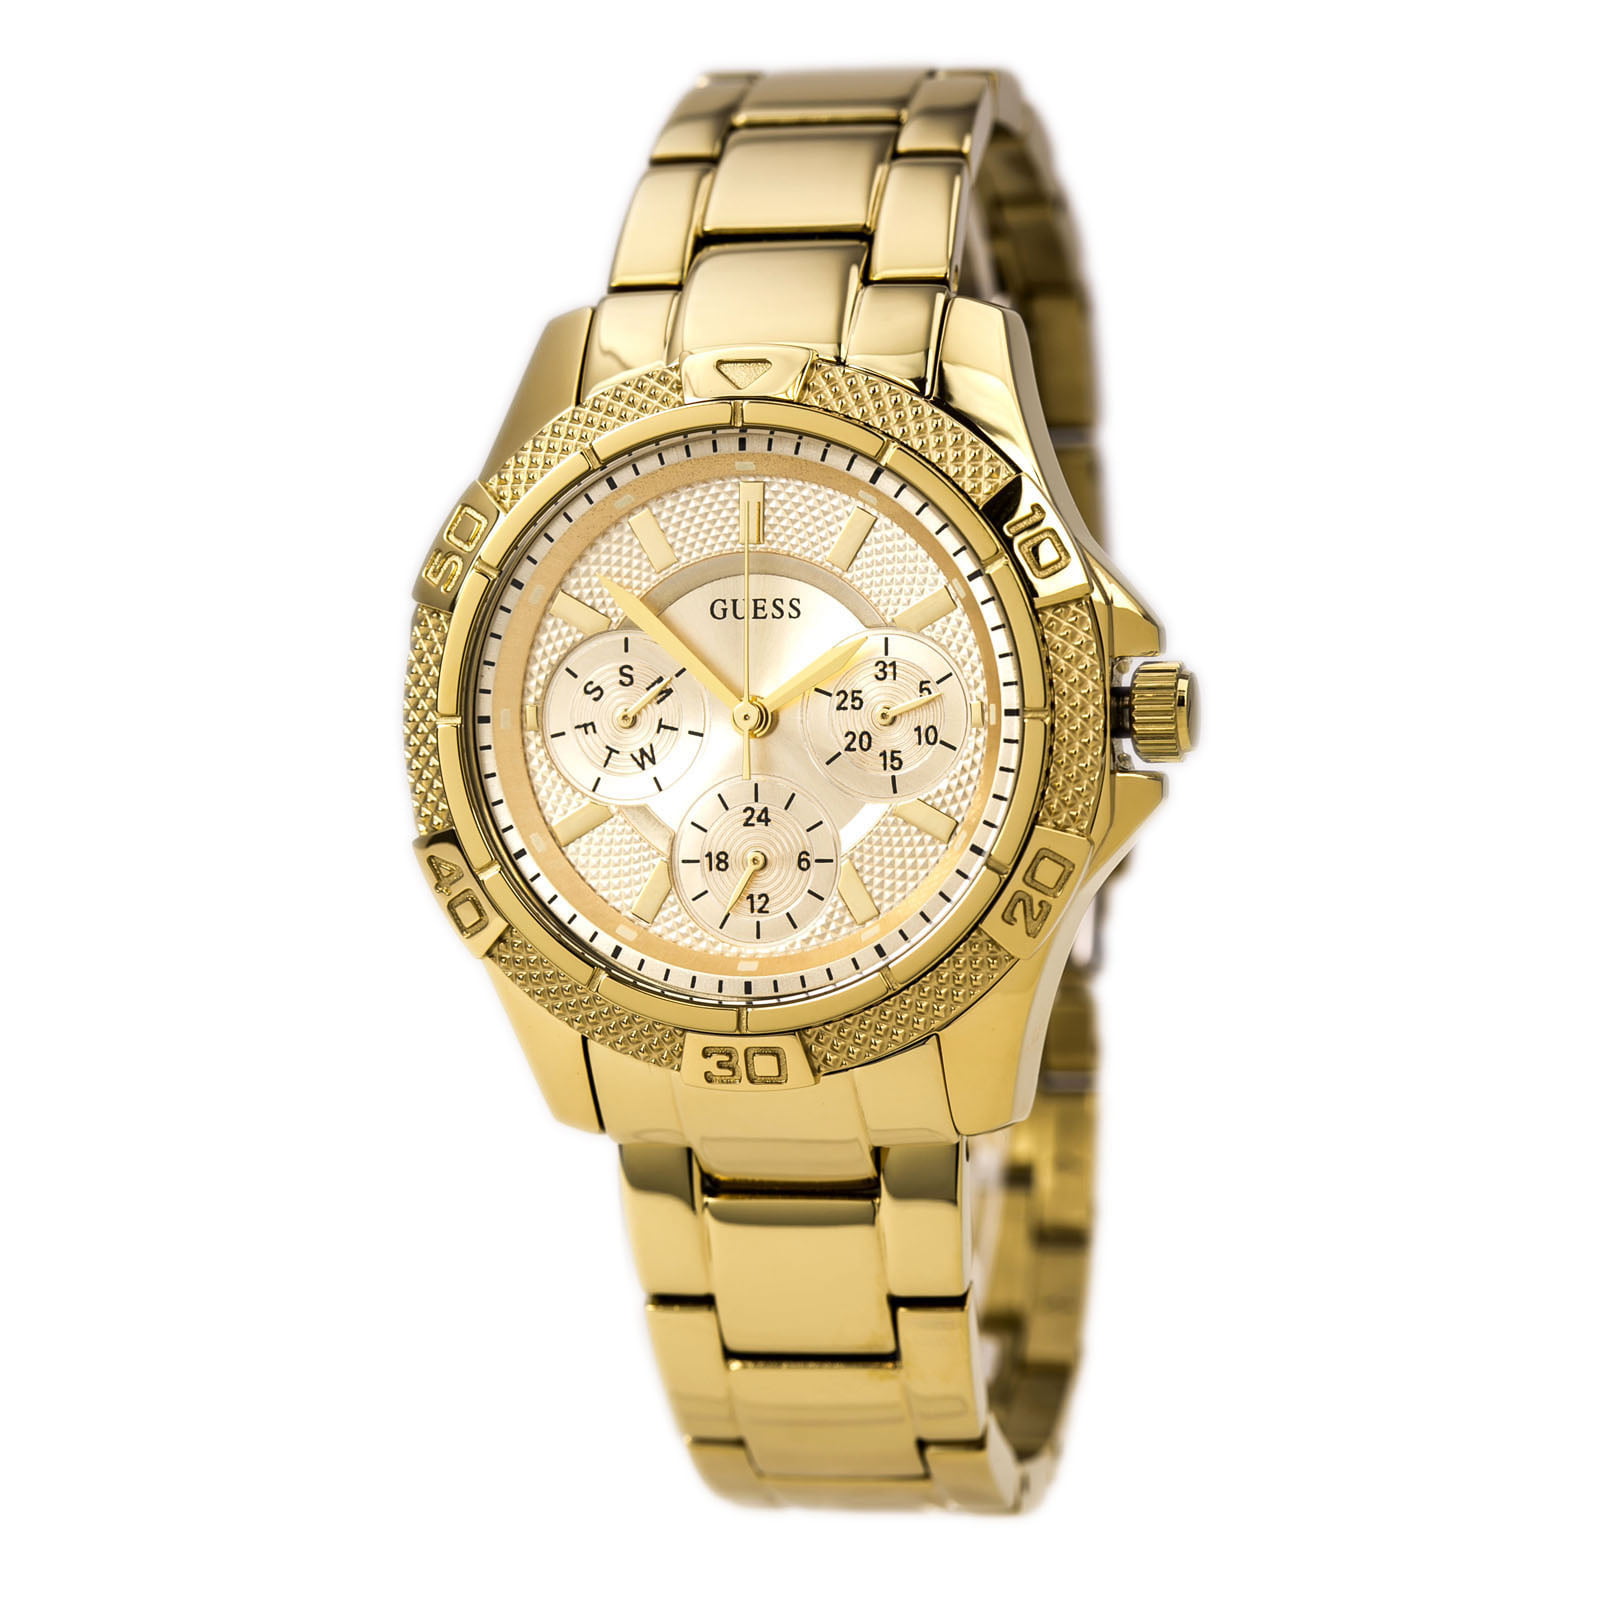 GUESS - GUESS Women's U0235L5 Dynamic Sports Gold Tone Dial Gold Plated